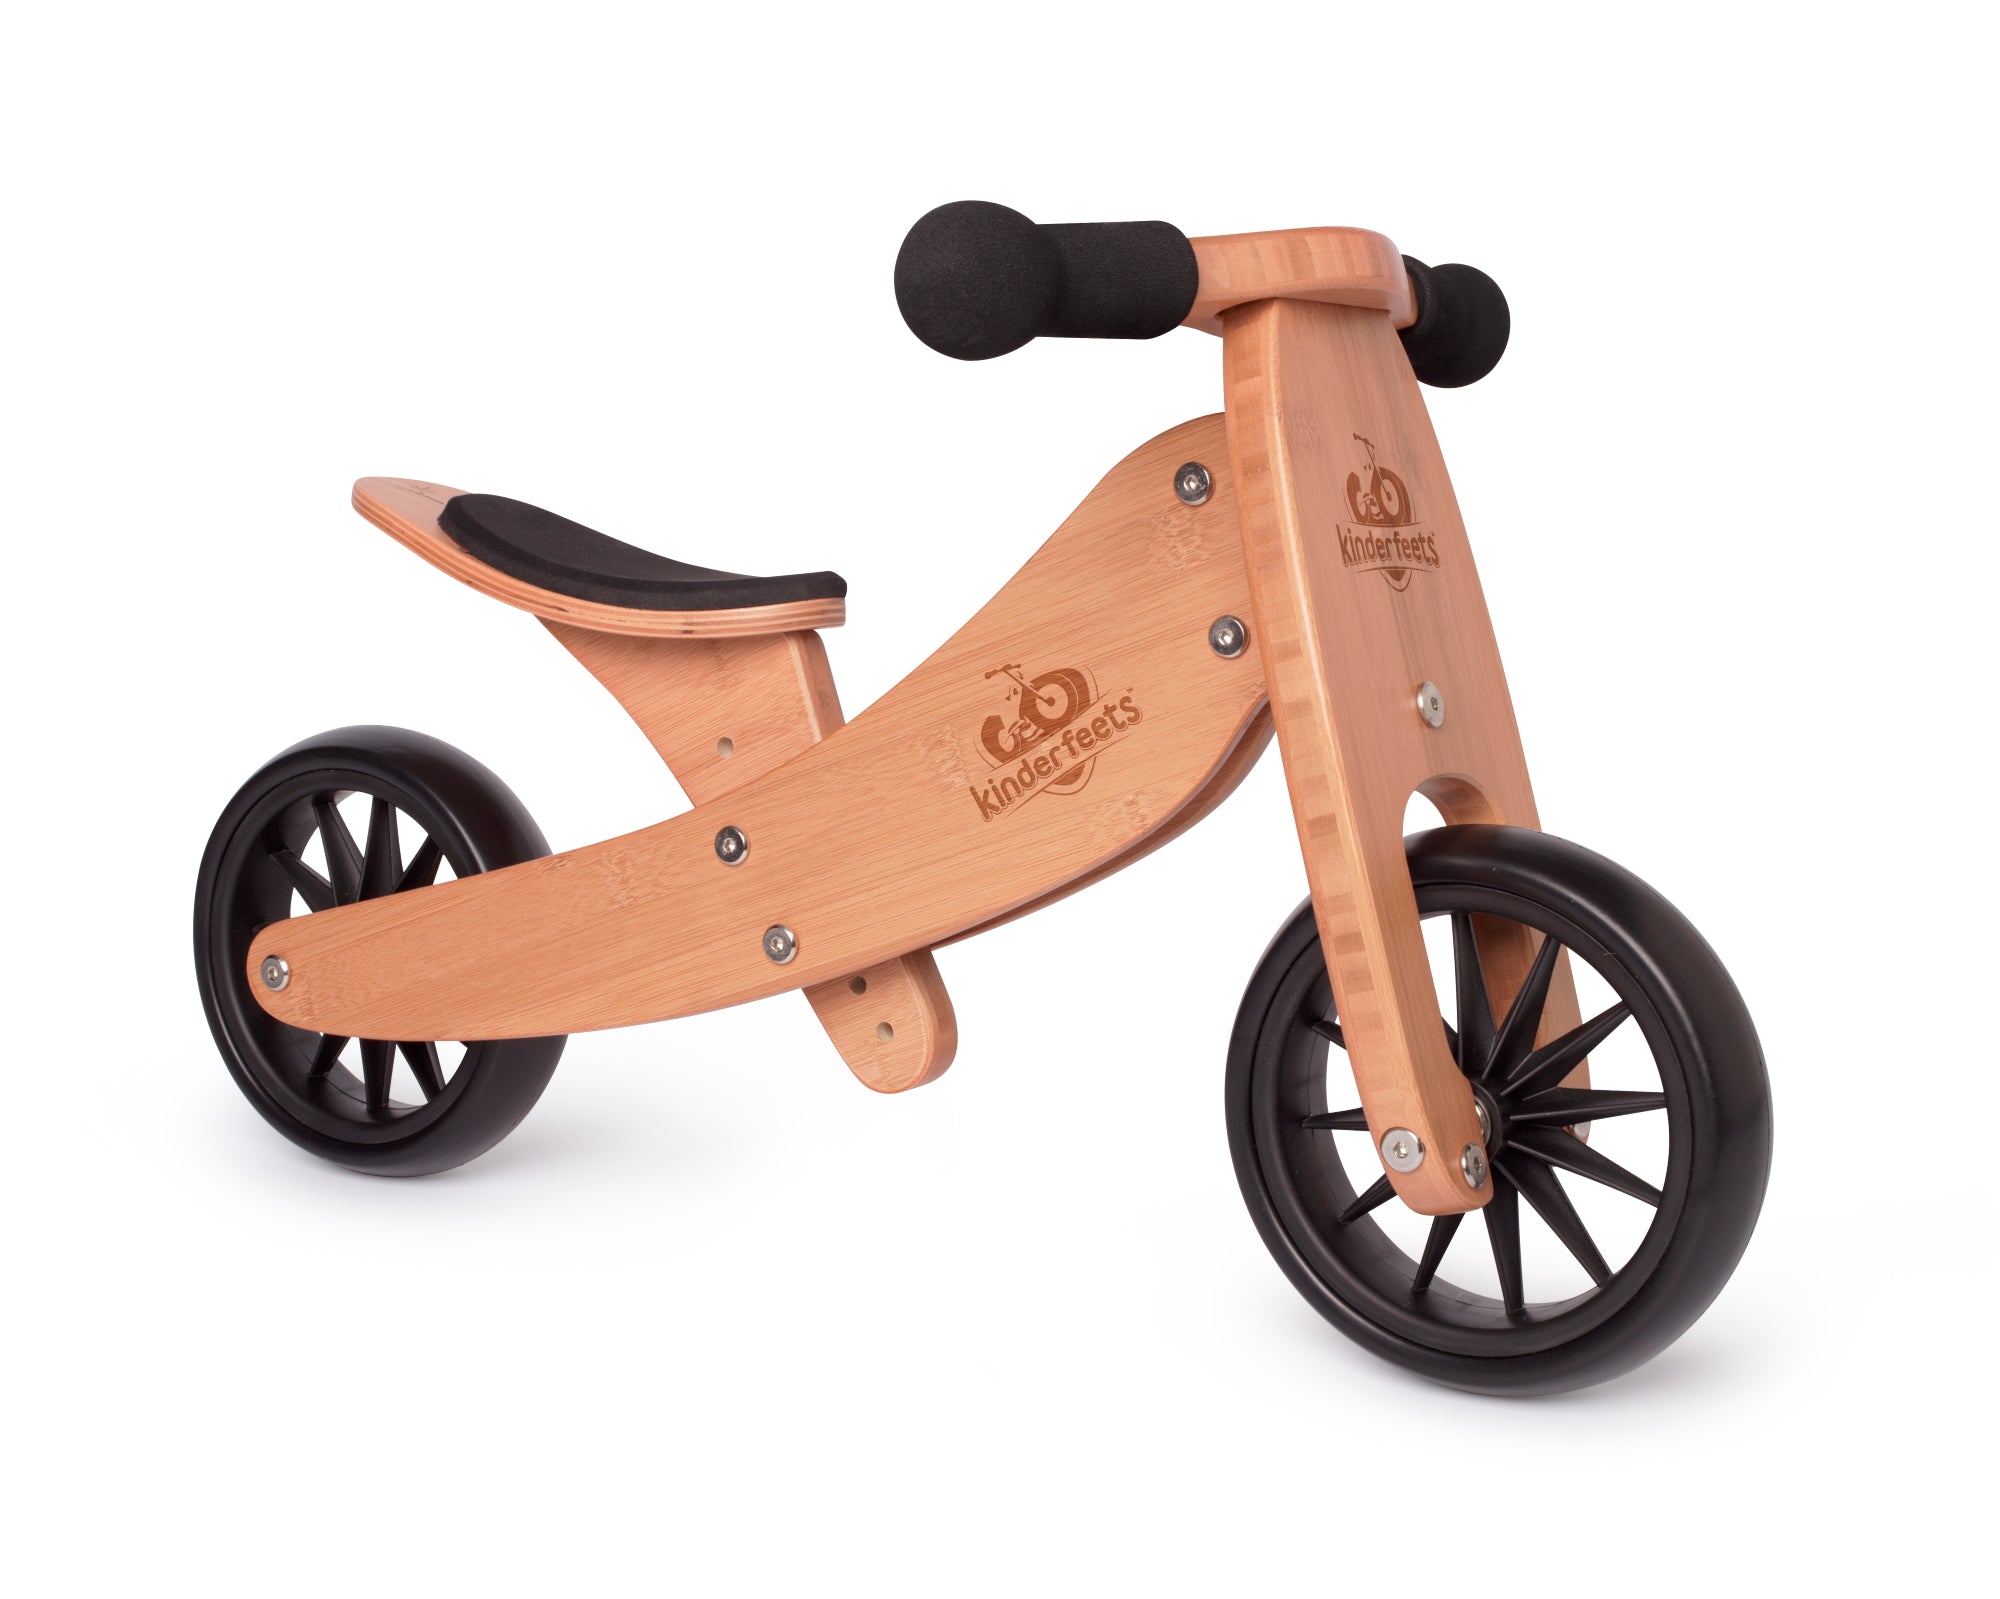 Kinderfeets TINY TOT Trike / Balance Bike 2-in-1 (Bamboo) for toddlers and young children training on a no pedals running bike / tricycle